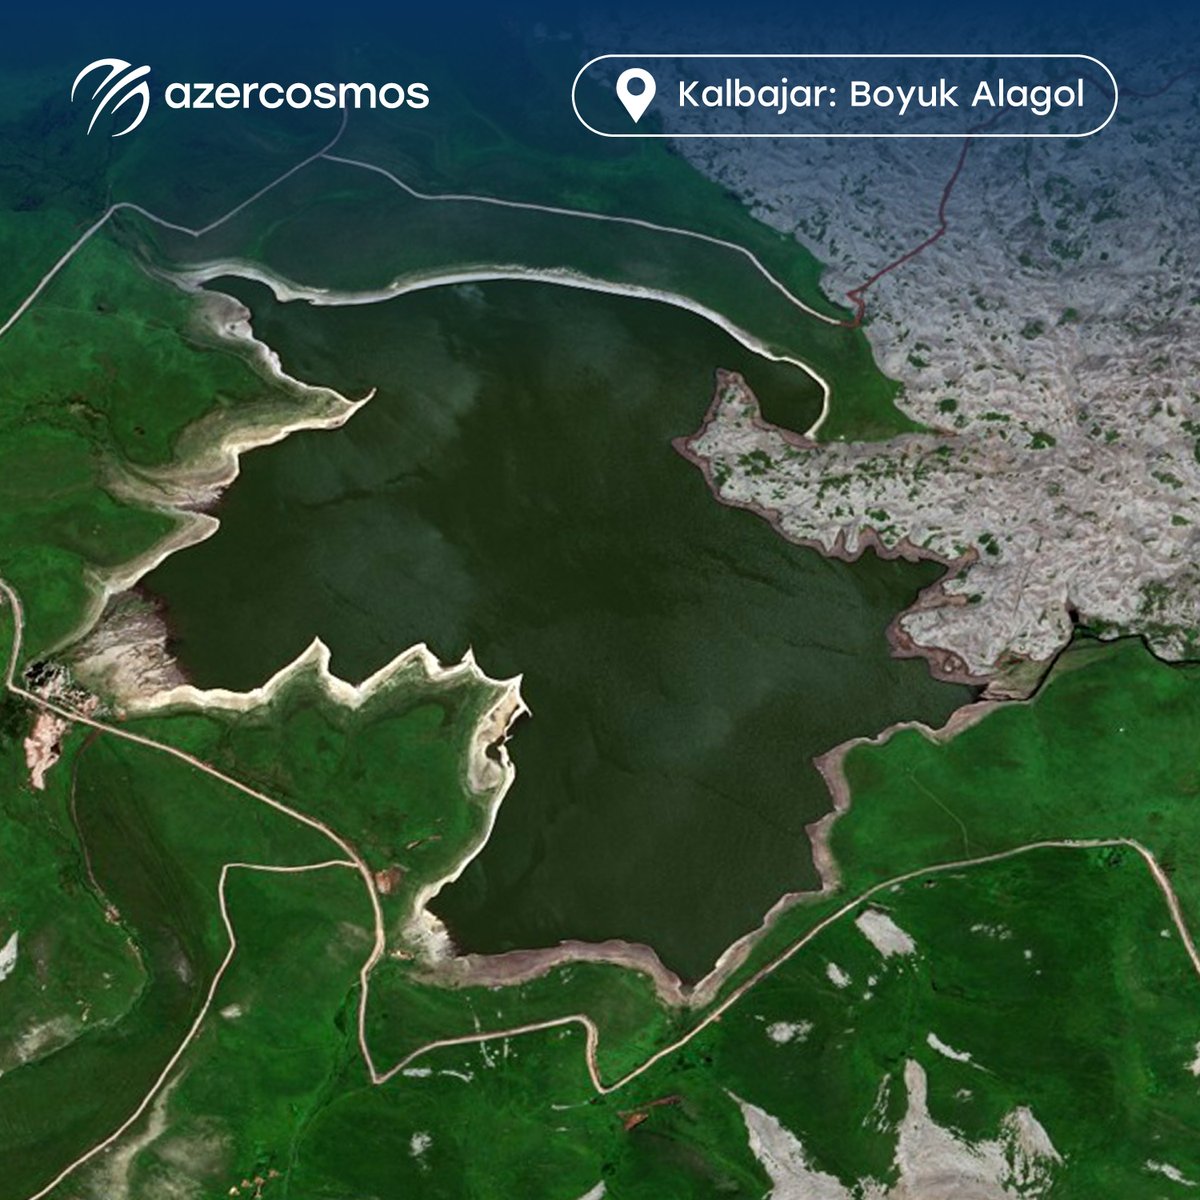 Kalbajar, an inseparable part of our beloved homeland, blessed with beauty and natural resources. Take a moment to admire the magnificence of Boyuk Alagol, a radiant jewel that complements the beauty of our precious land.

#Azercosmos